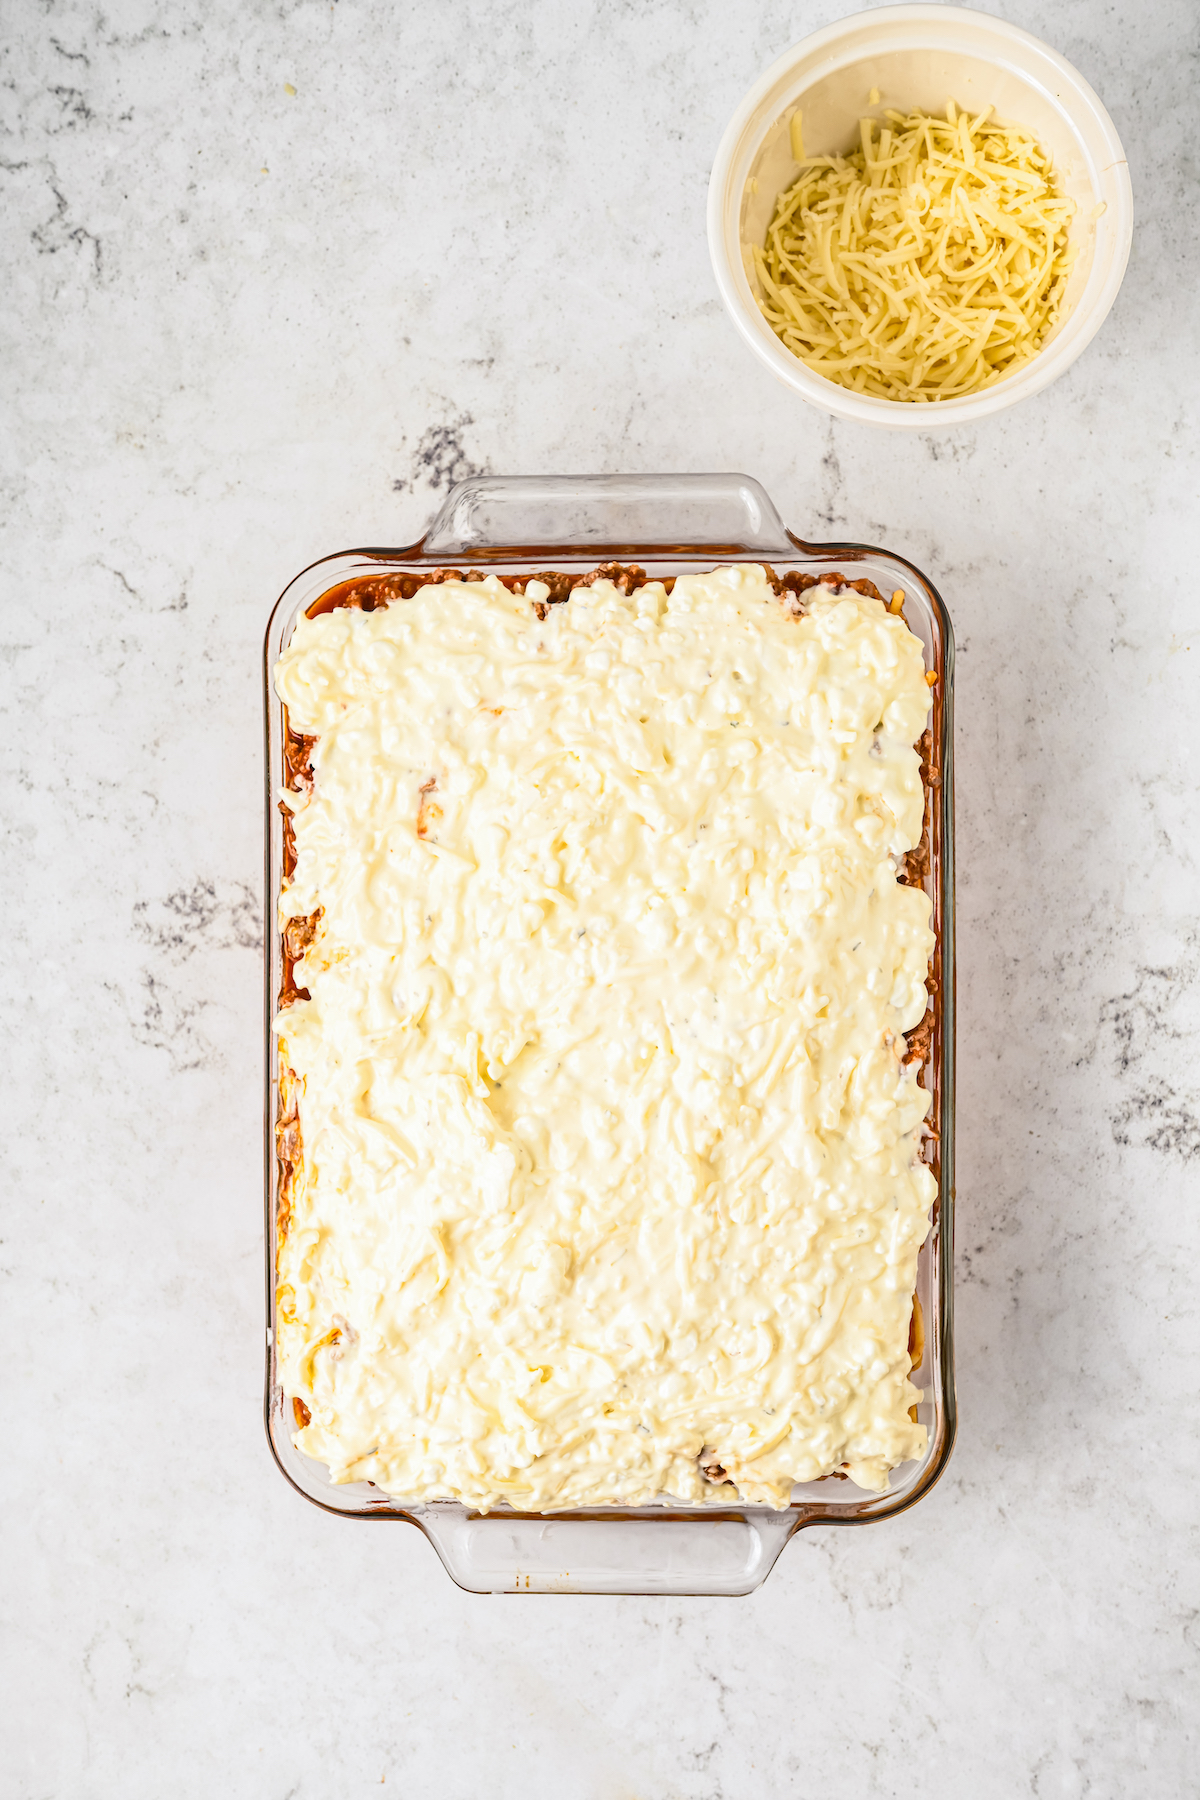 A casserole topped with a cheese mixture.